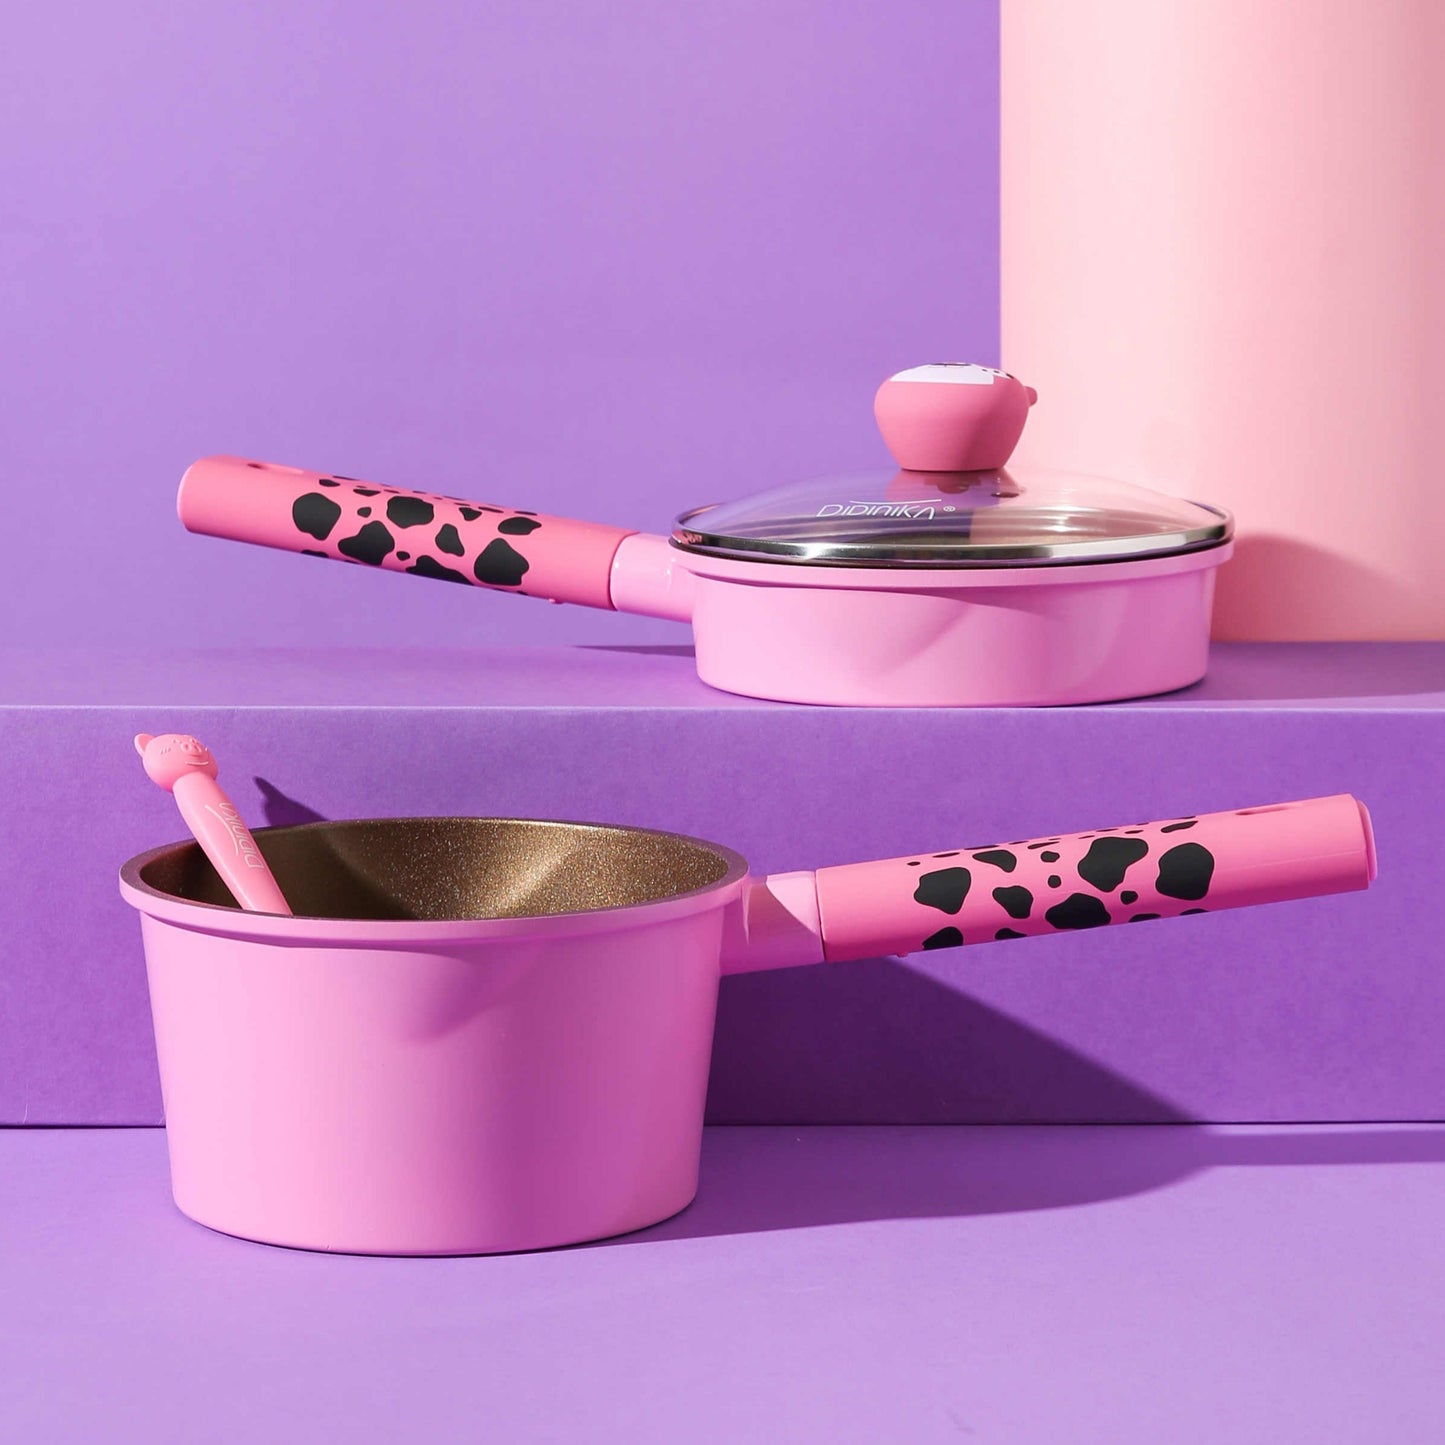 The Pink Panther Baby Cookware